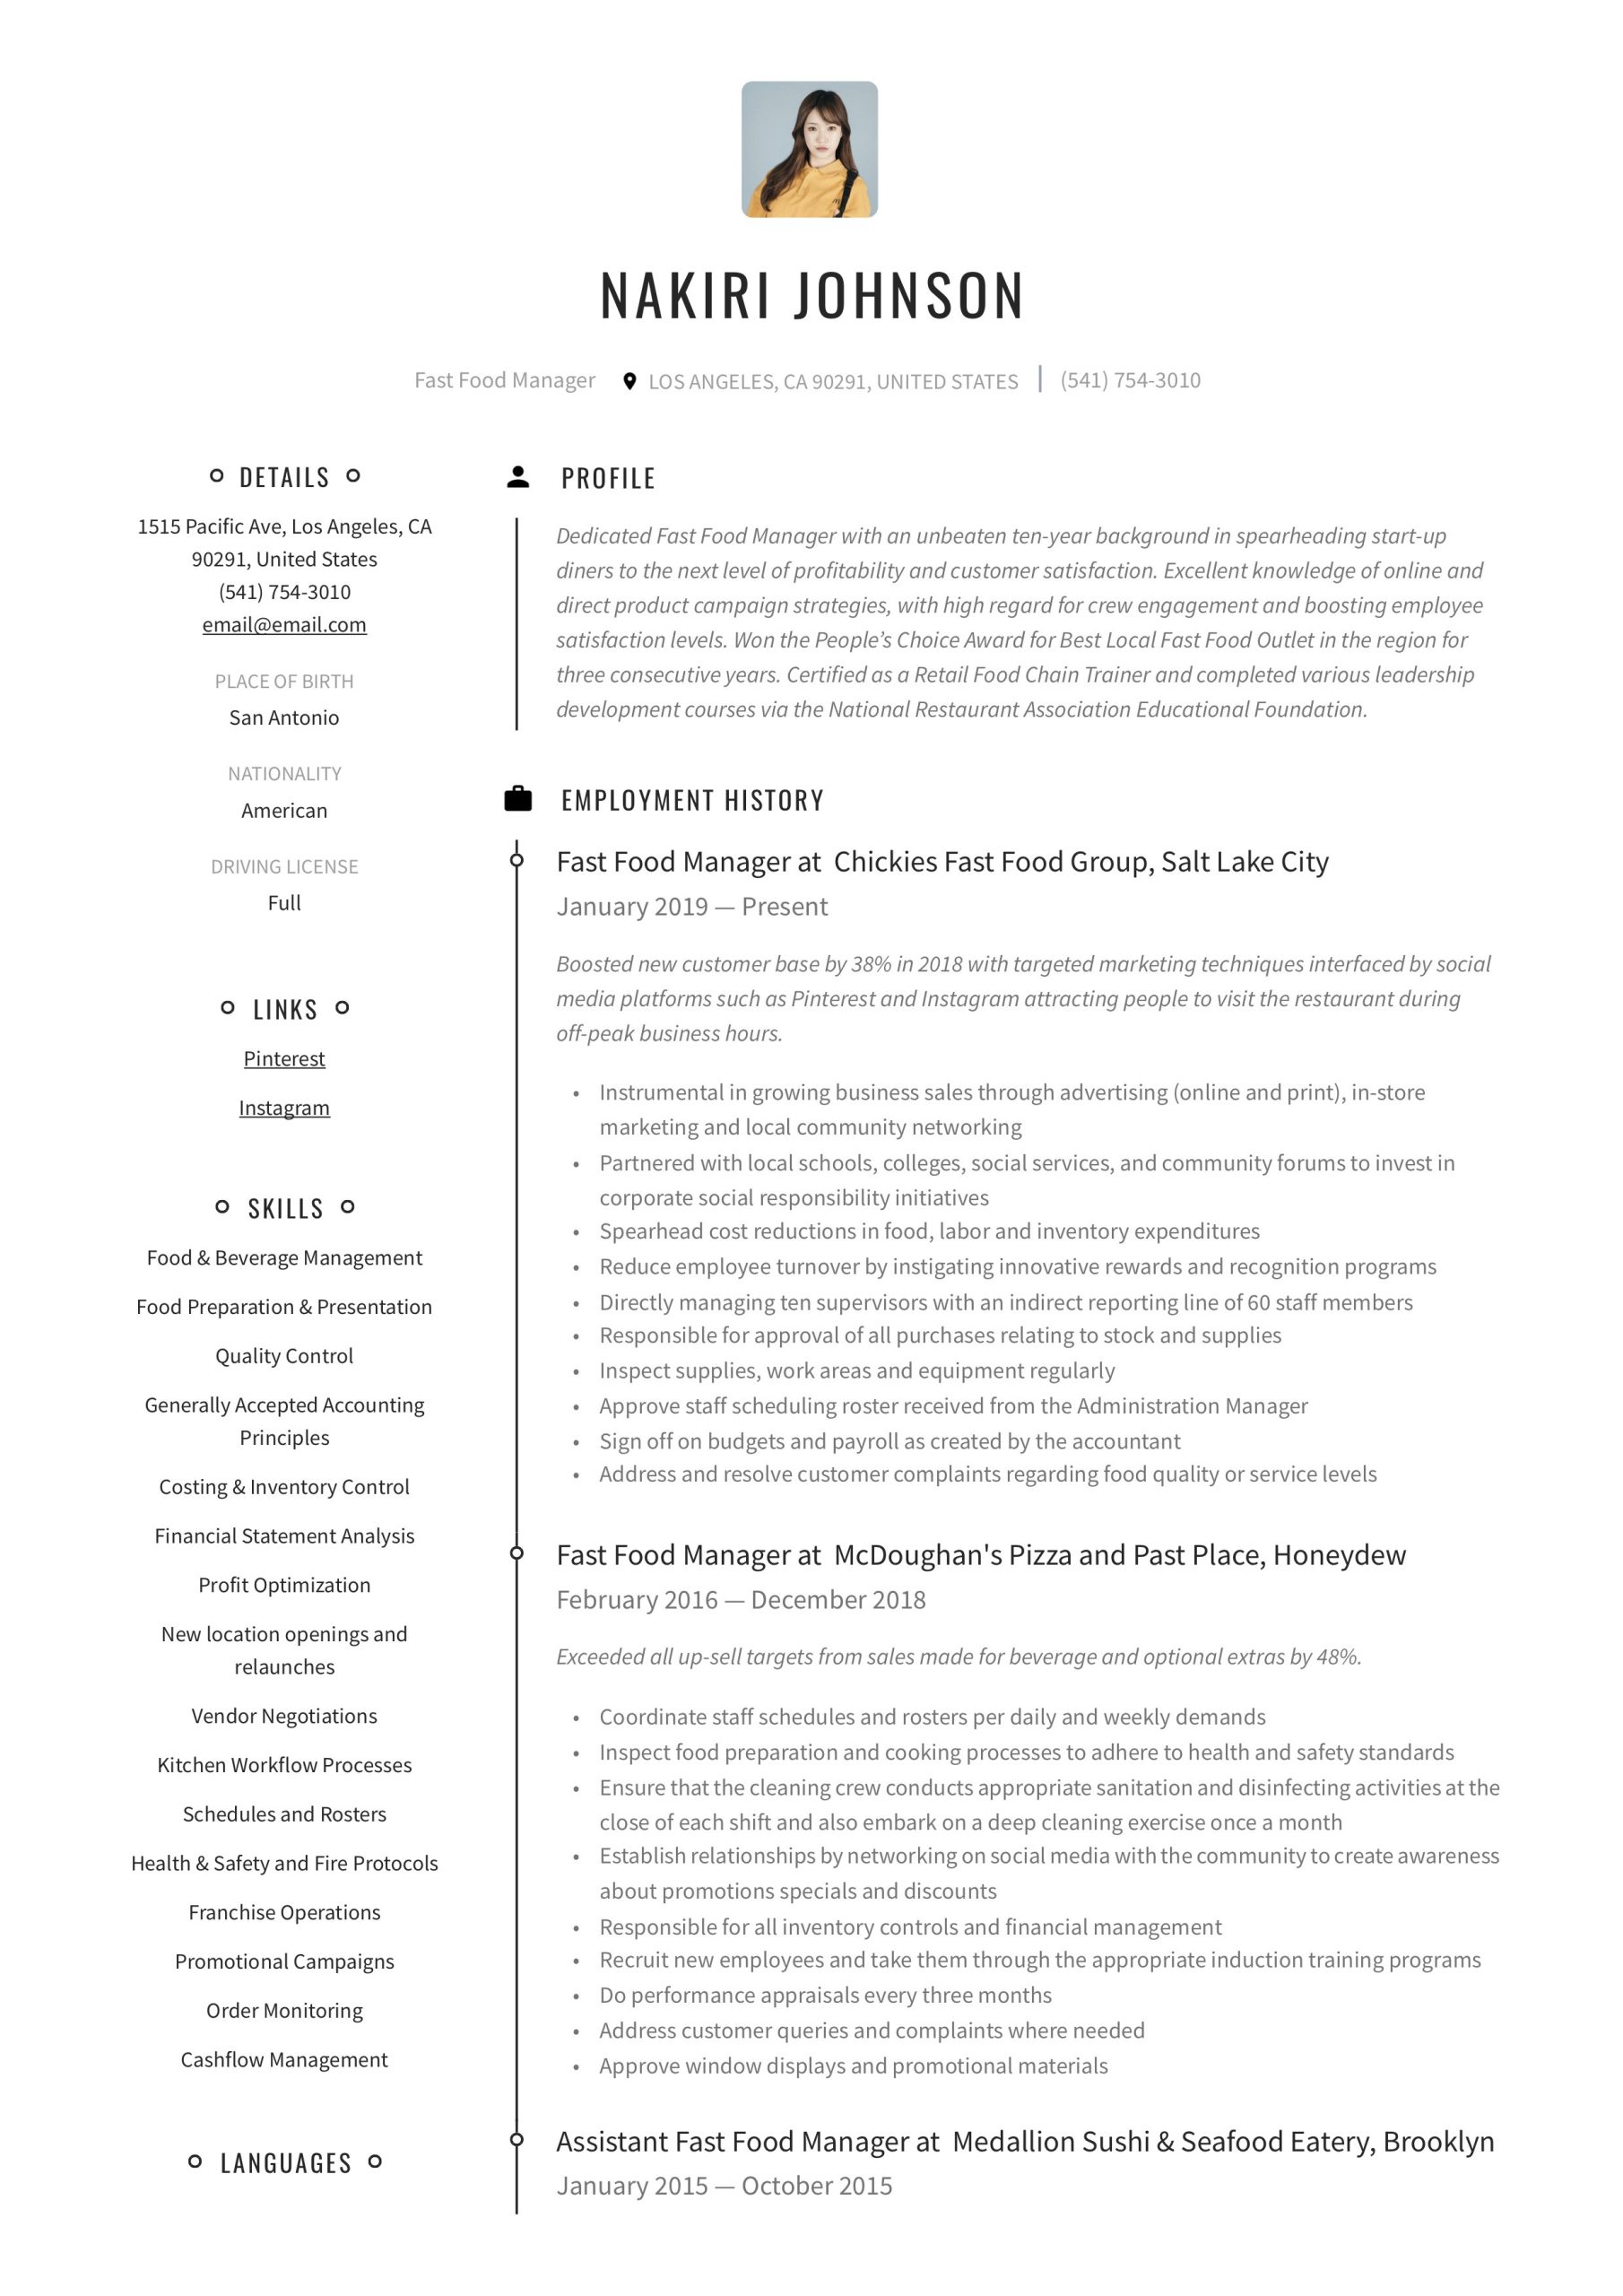 Sample Resumes for Fast Food Jobs Fast Food Manager Resume & Writing Guide  12 Examples 2020